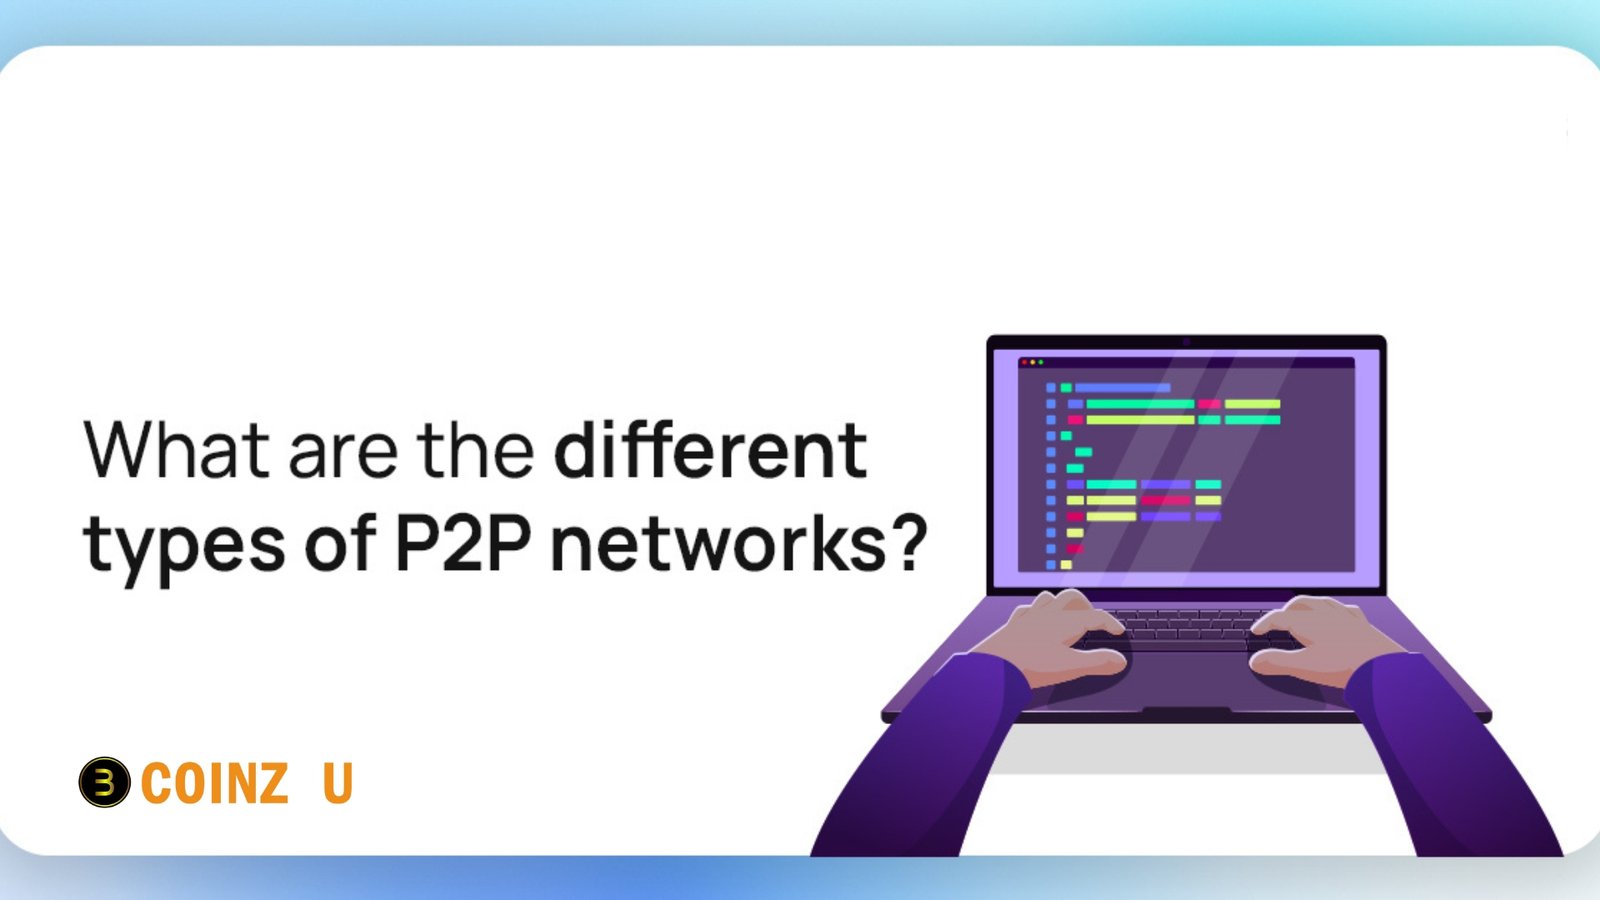 Types of P2P Networks